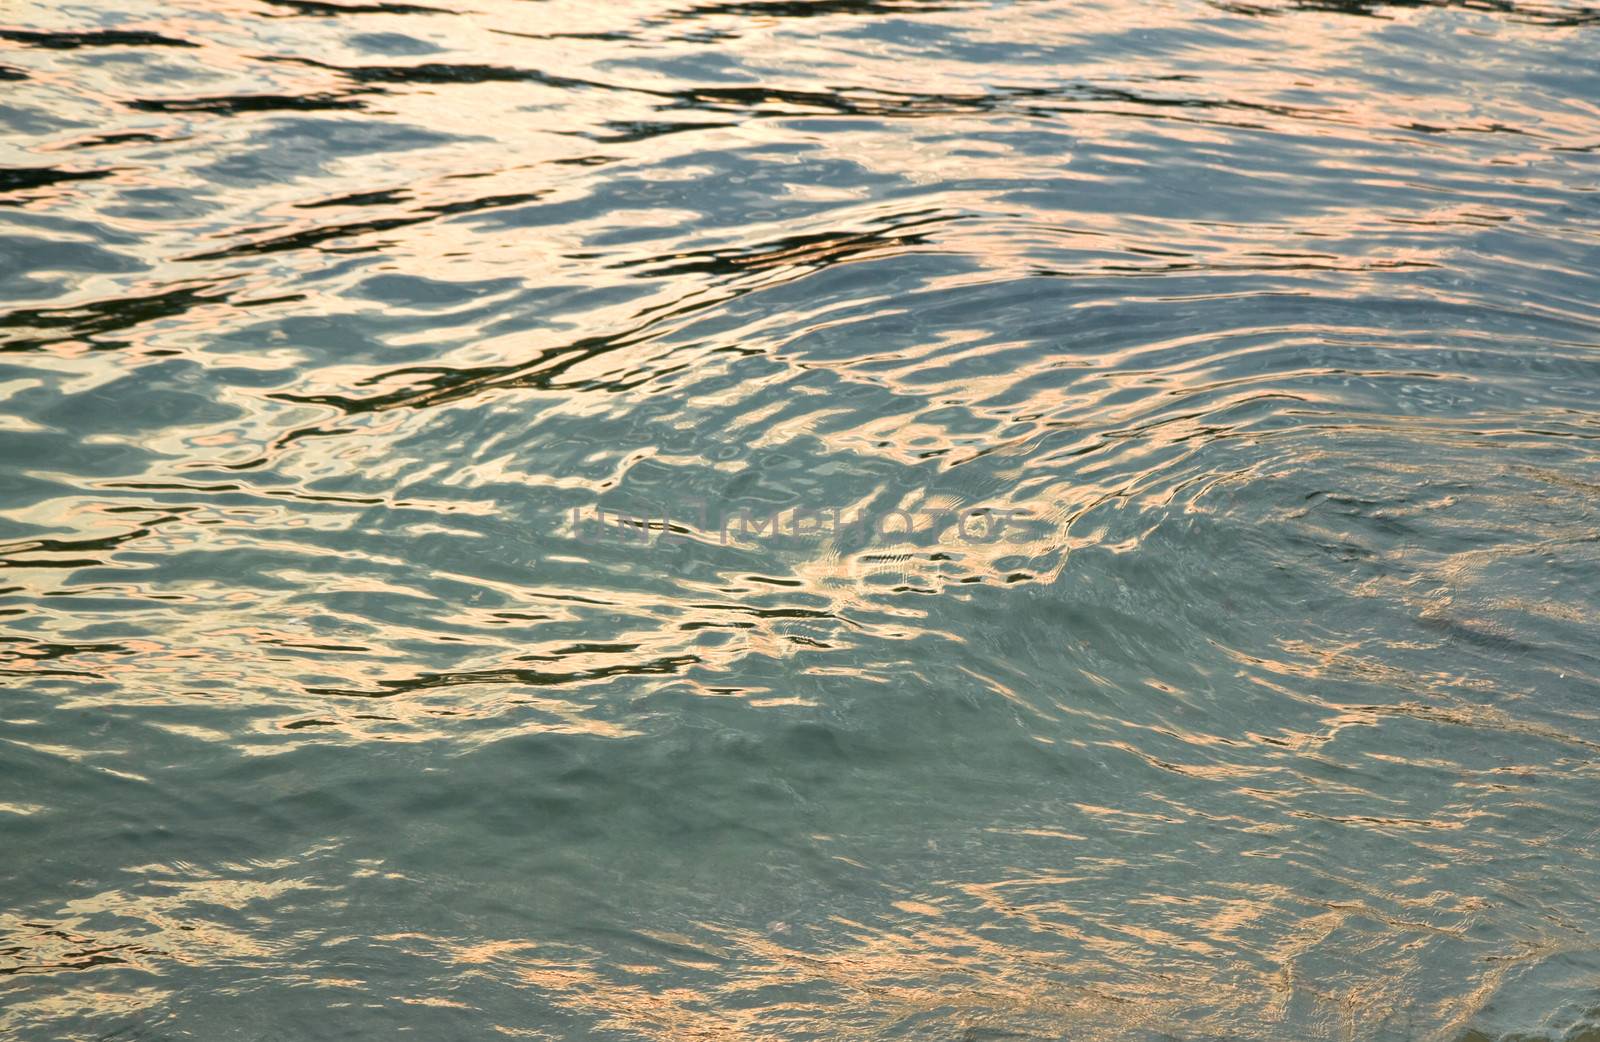 Sunset reflections on water surface by Colette